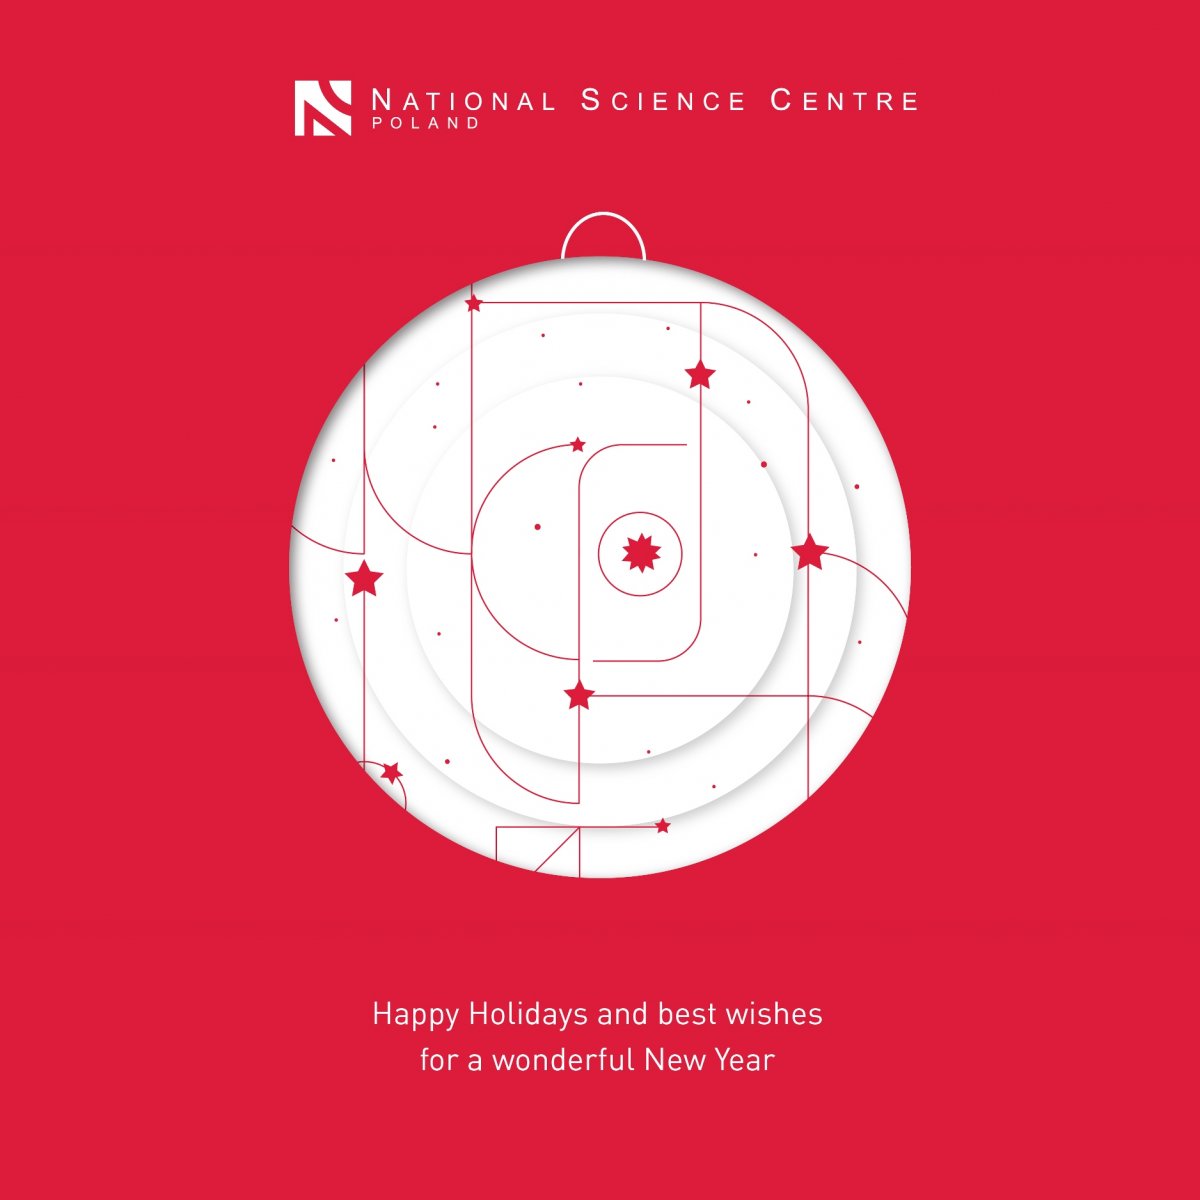 National Science Centre wish You Happy Holidays and best wishes for a wonderful New Year